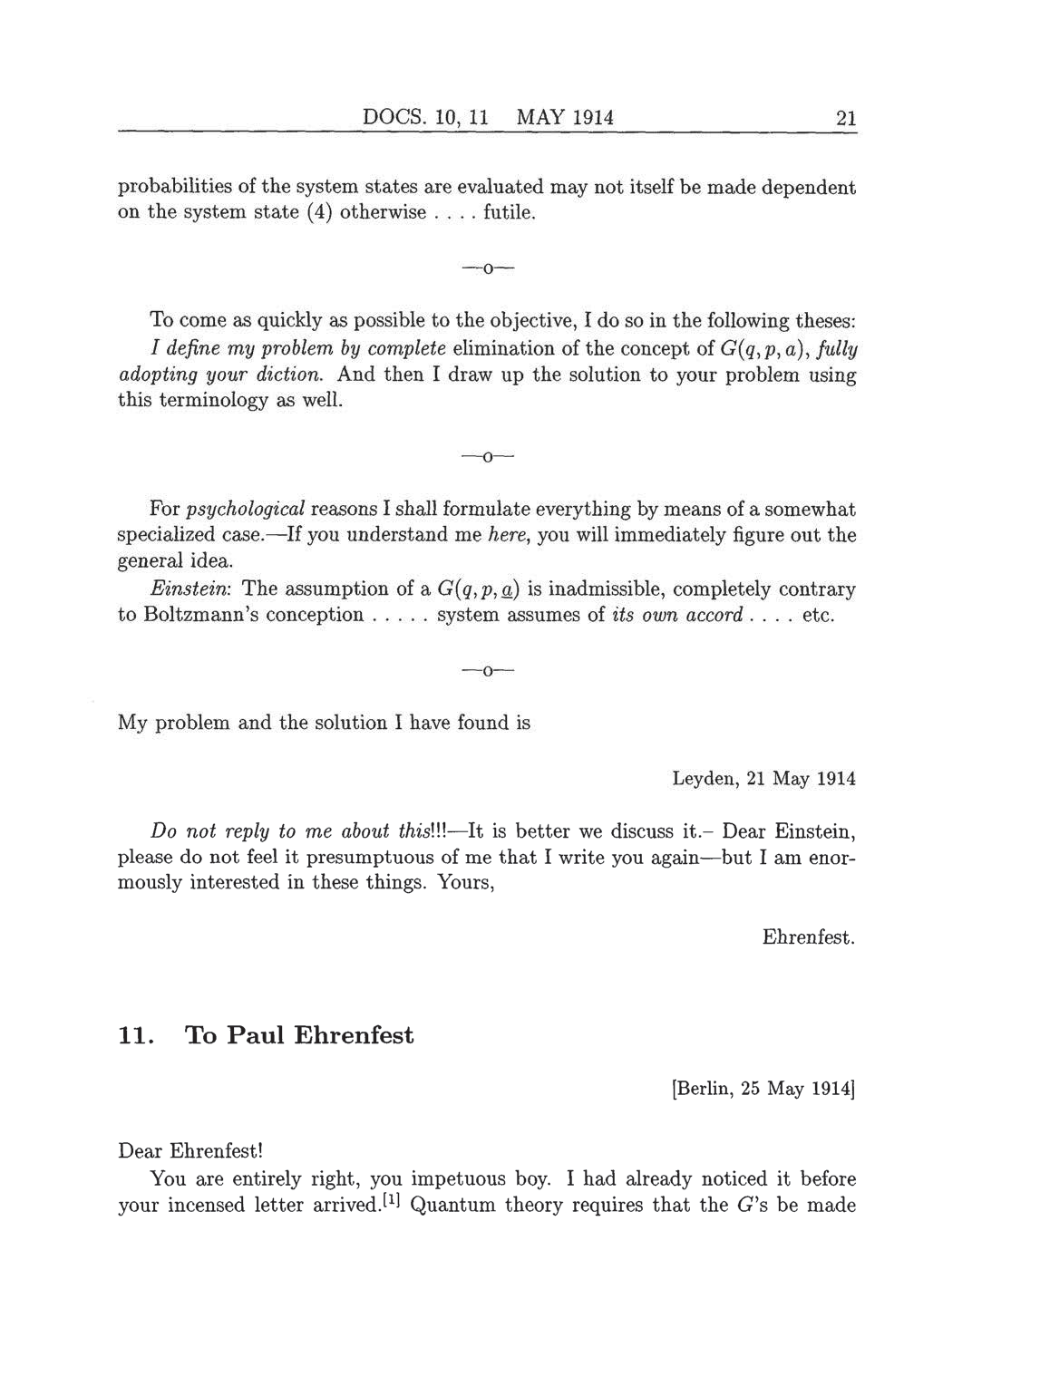 Volume 8: The Berlin Years: Correspondence, 1914-1918 (English translation supplement) page 21